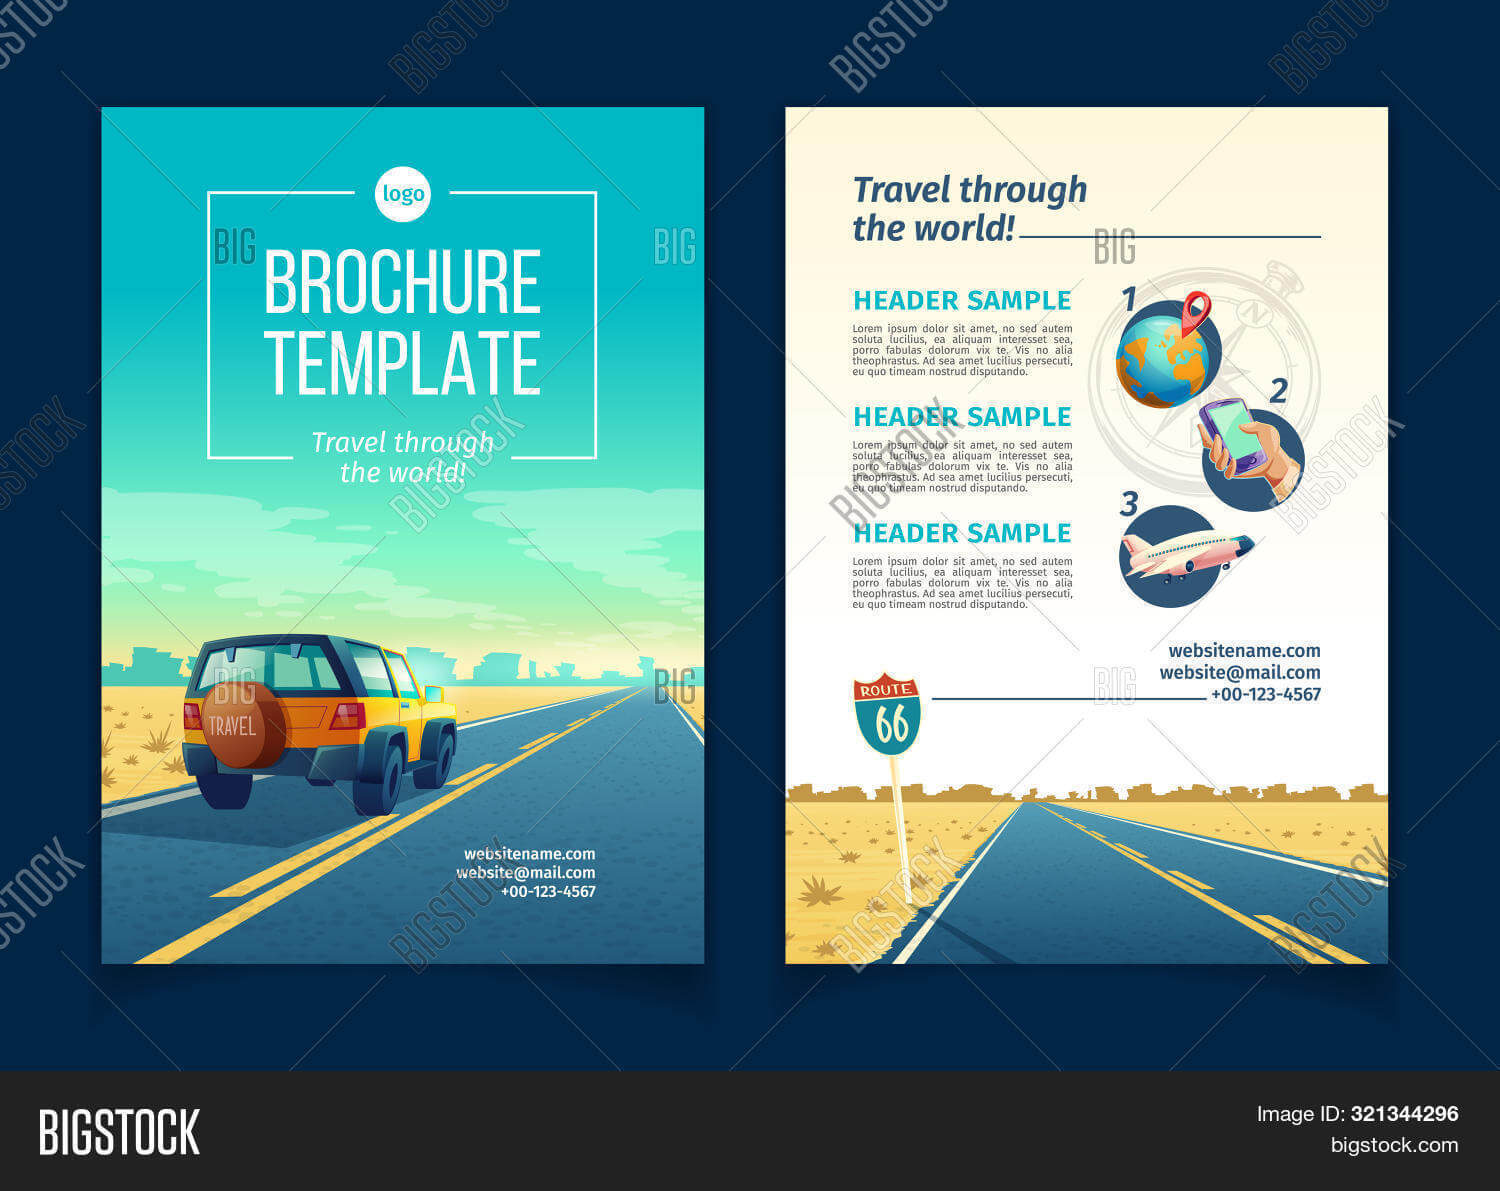 Brochure Template Image & Photo (Free Trial) | Bigstock Regarding Travel And Tourism Brochure Templates Free